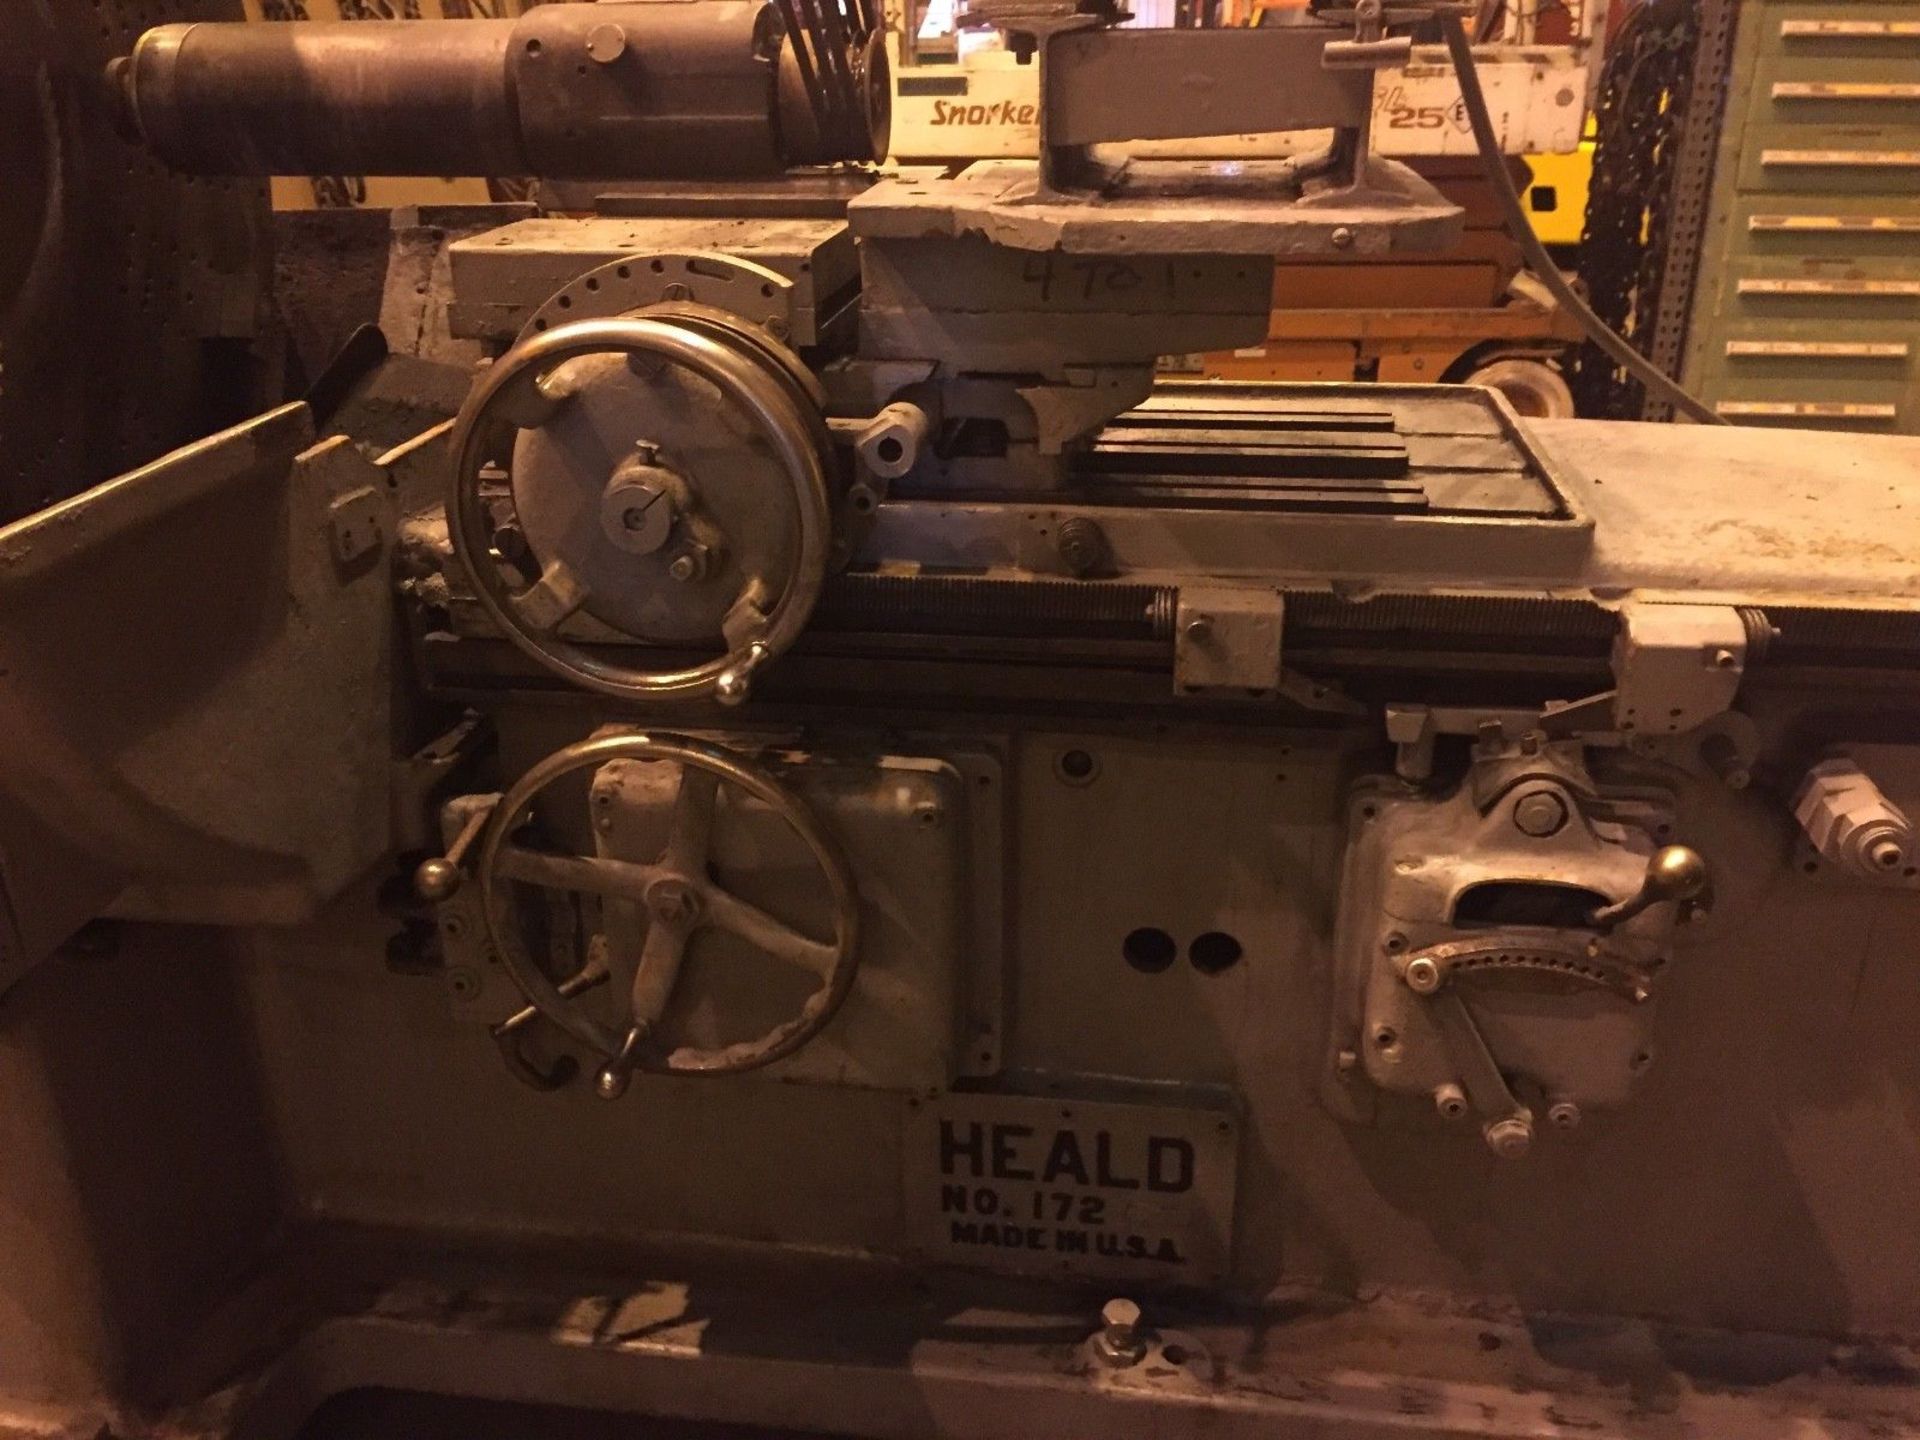 Heald No. 172 50 in ID Grinder Internal Cylindrical Universal - Free Loading - Image 3 of 9